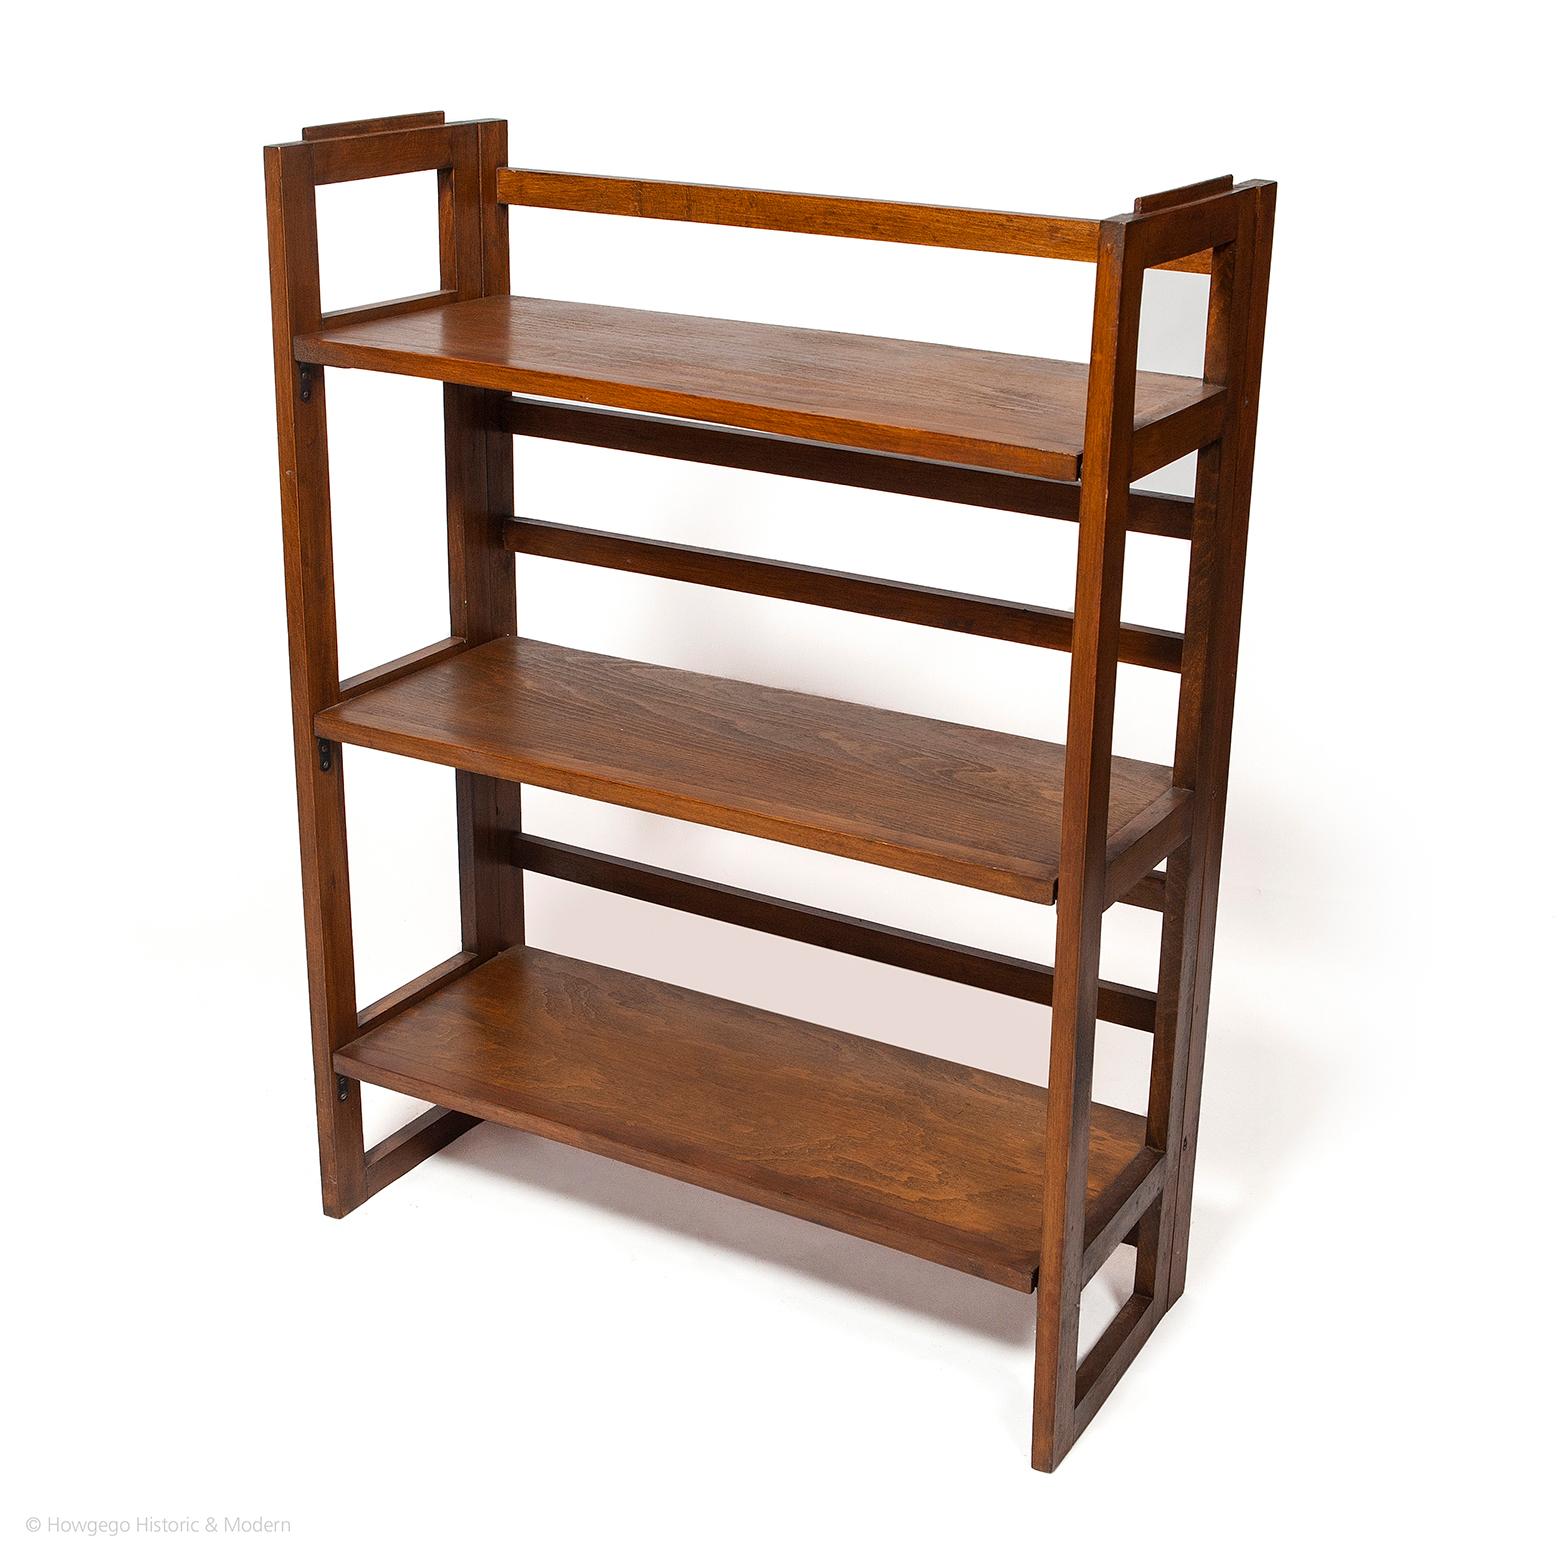 An unusual and ingenious, mid-century modern retro, portable, folding table top bookcase or display shelf. Slatted supports with three shelves folding flat. Light and easy to carry. 
Versatile folding mechanism for display, books or bathroom